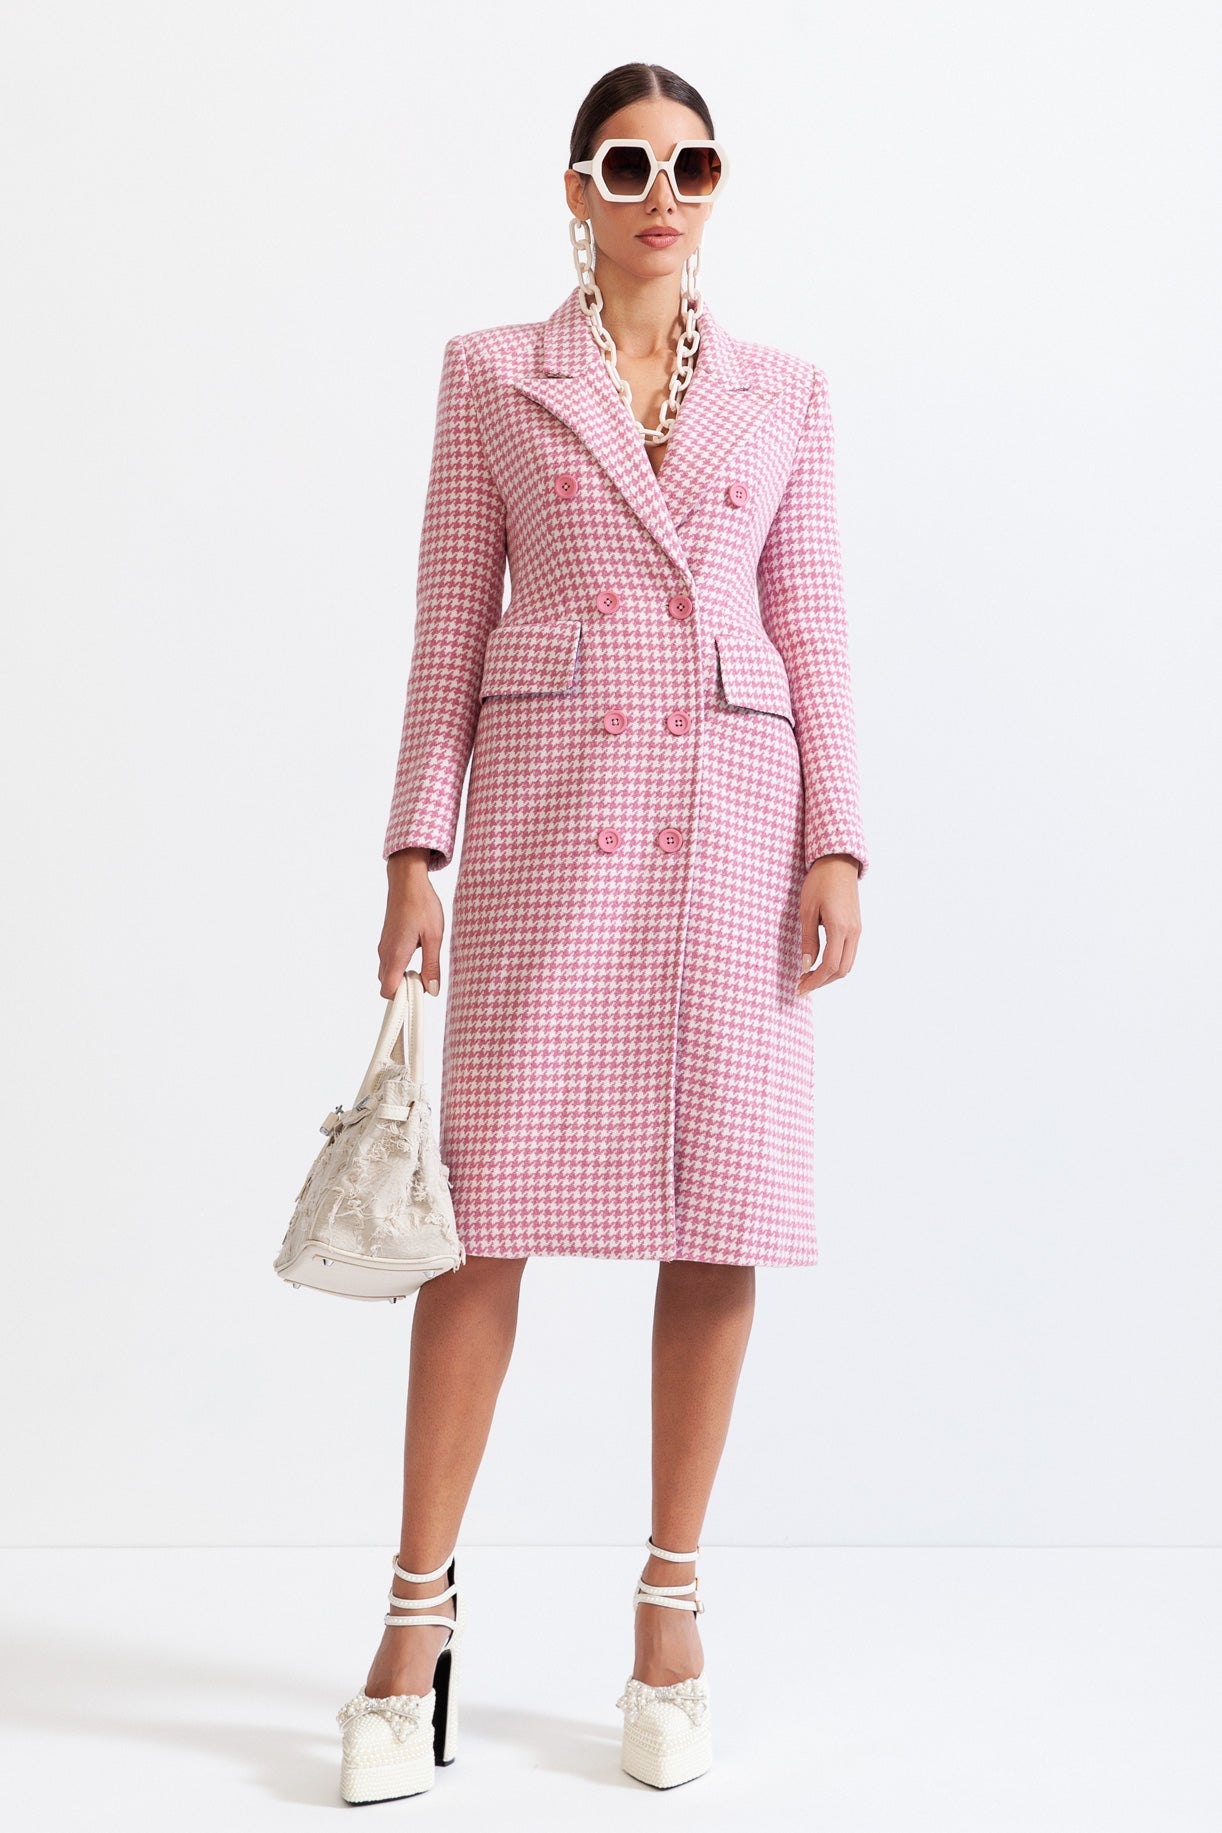 LUNA Houndstooth Coat with Pointed Shoulders - Pink